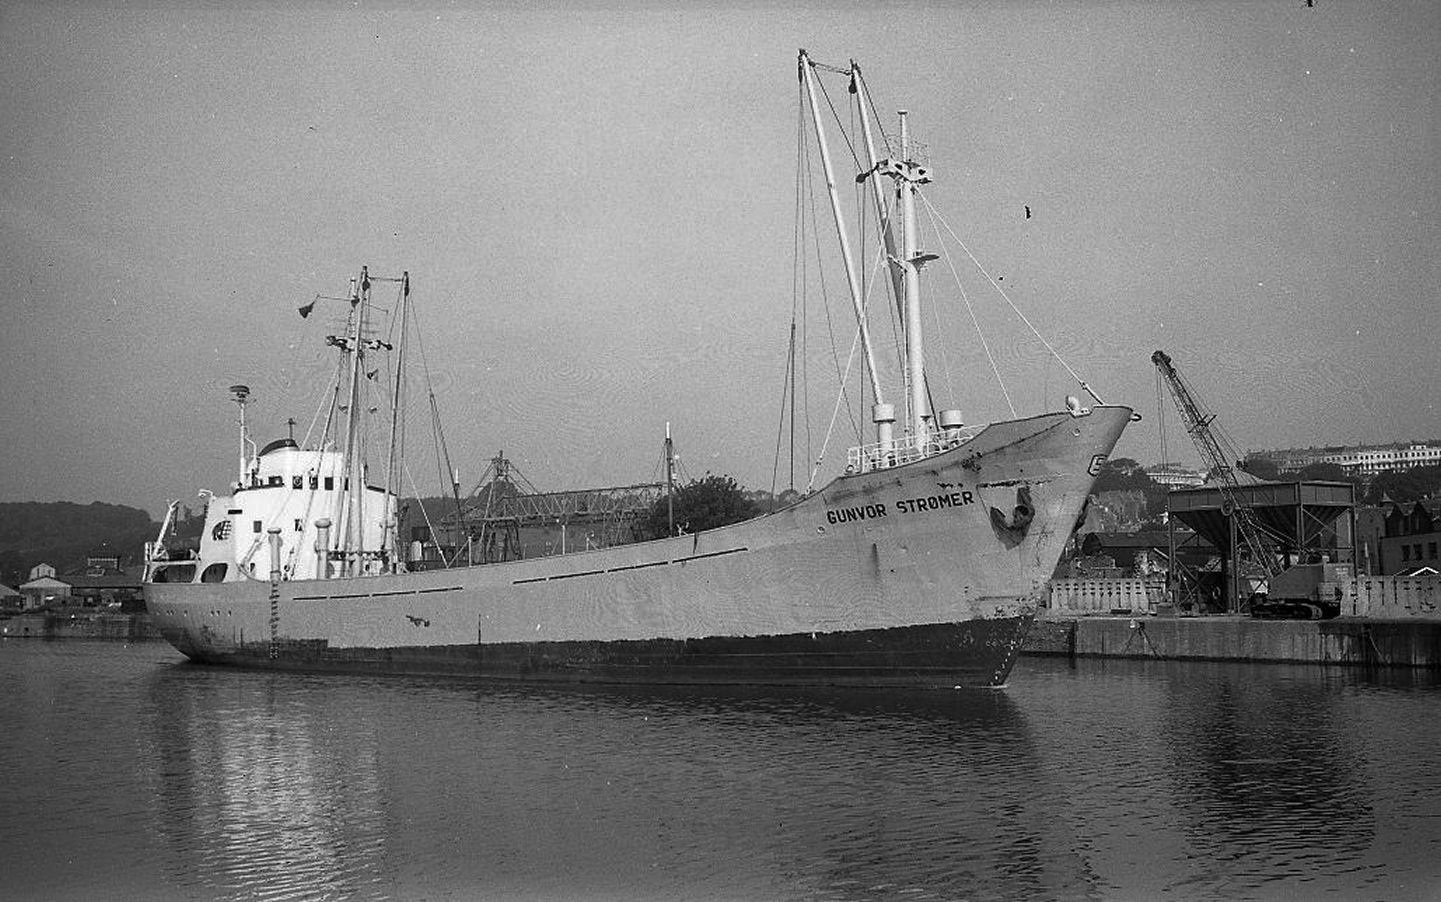 Gunvor Stromer No In The Floating Harbour 25 June 64 Ray Perry